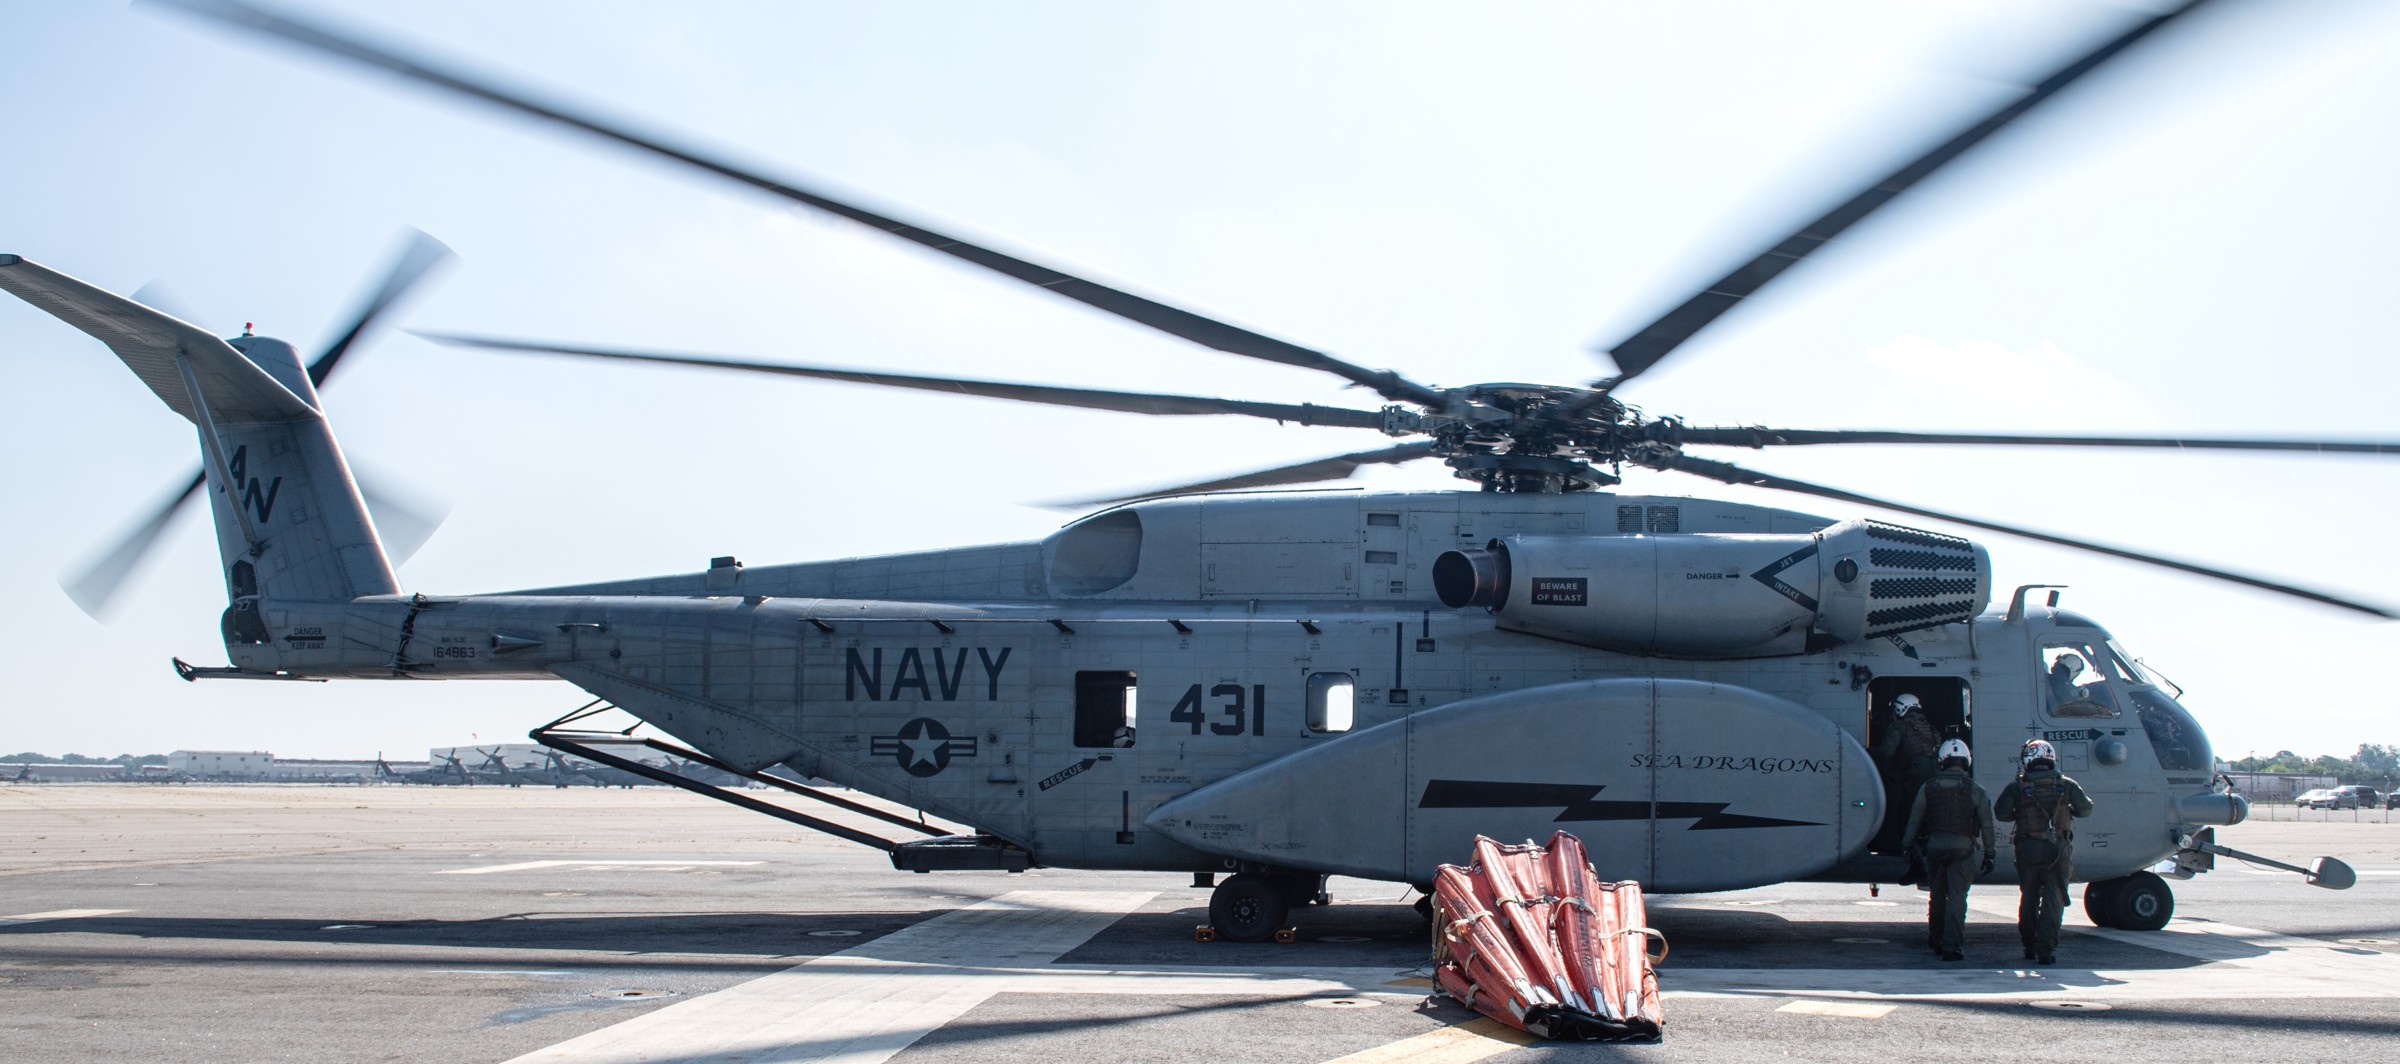 hm-12 sea dragons helicopter mine countermeasures squadron navy mh-53d 31